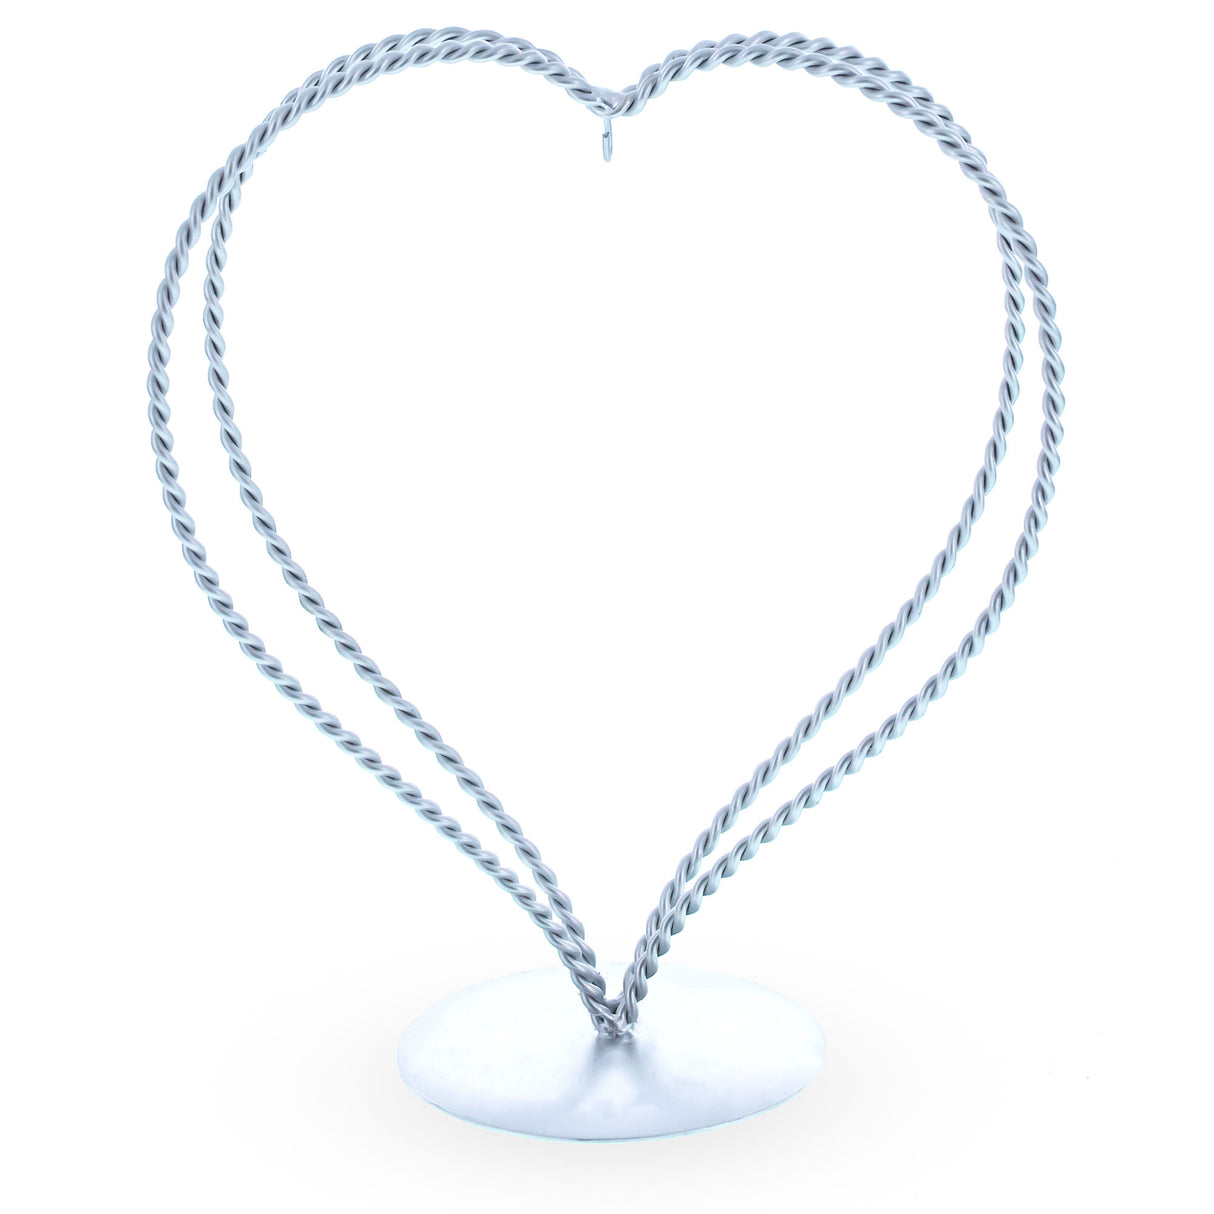 Metal Double Swirled Heart Silver Metal Solid Round Base Ornament Display Stand 7.25 Inches in Silver color